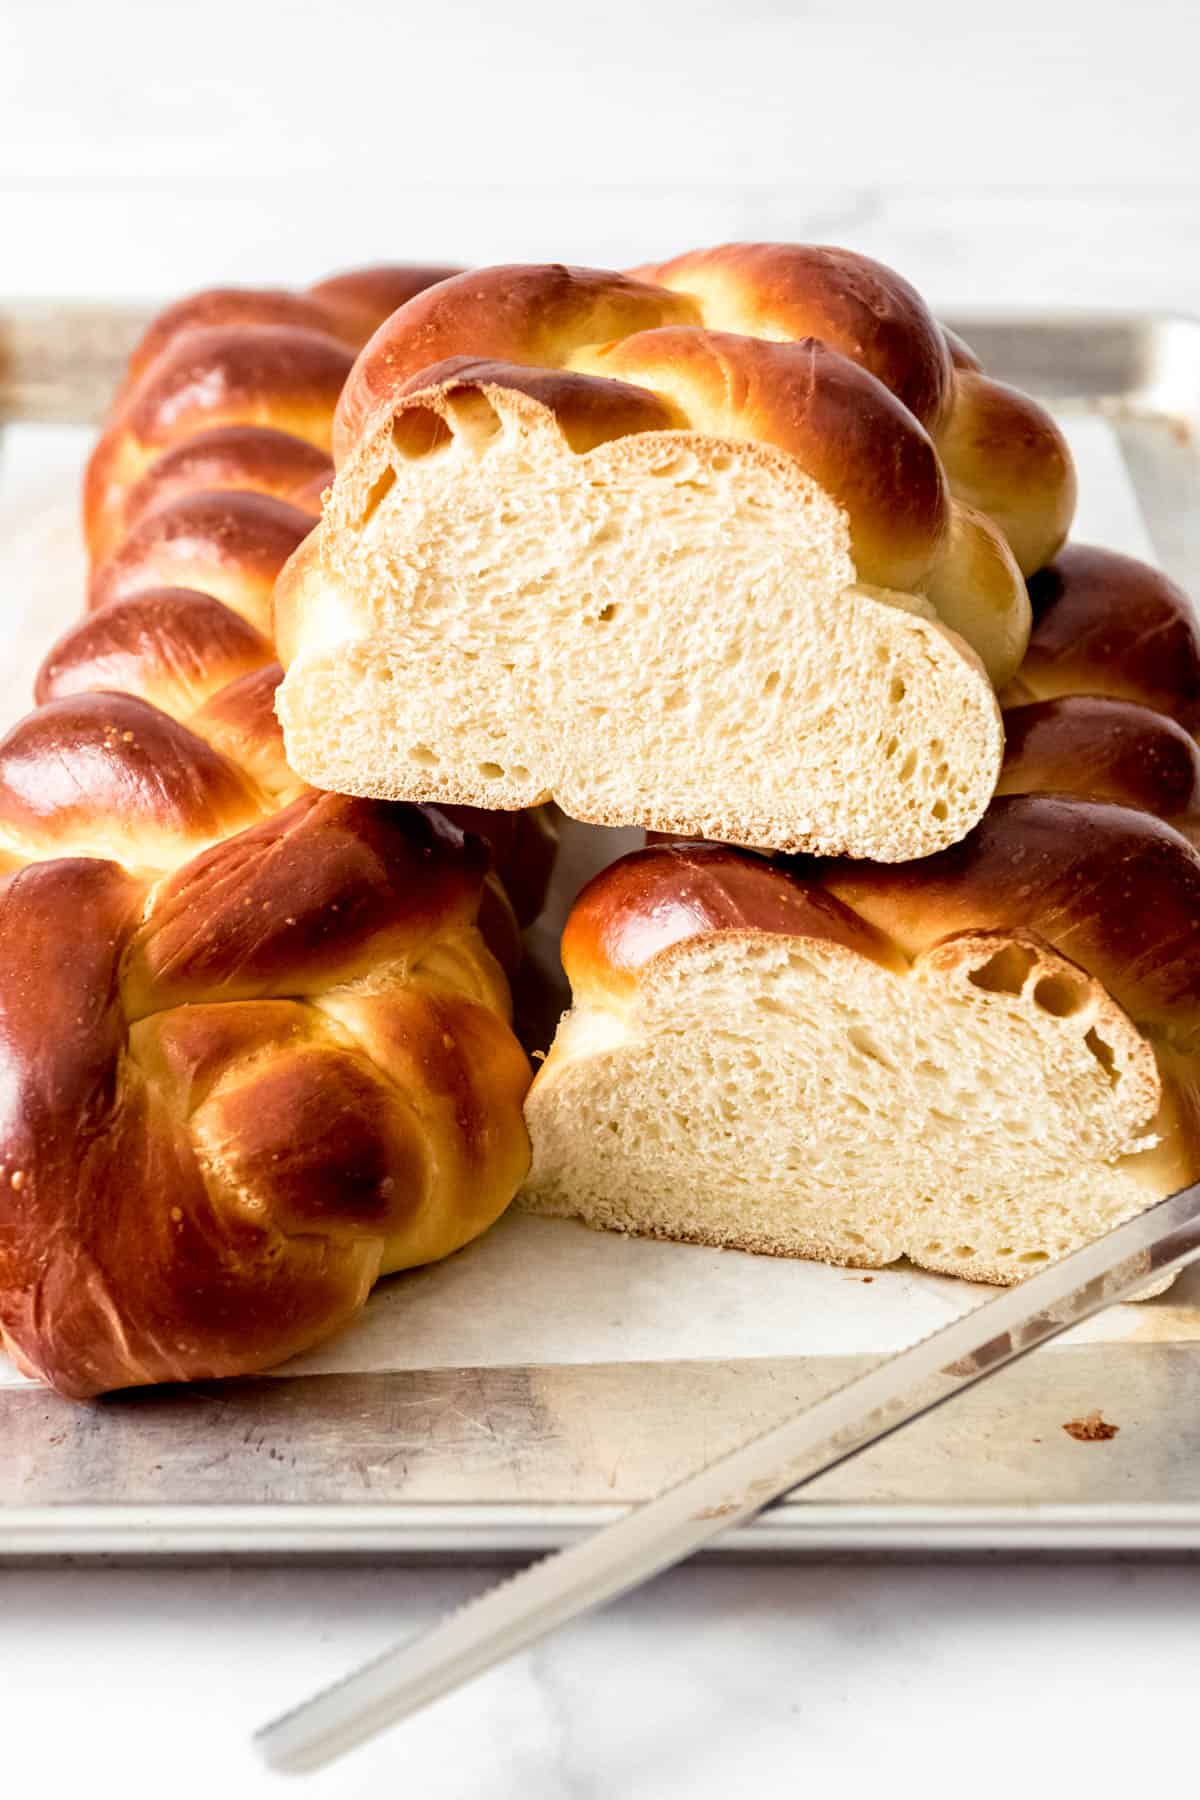 A loaf of challah bread sliced in half sitting on top of another loaf of challah bread.